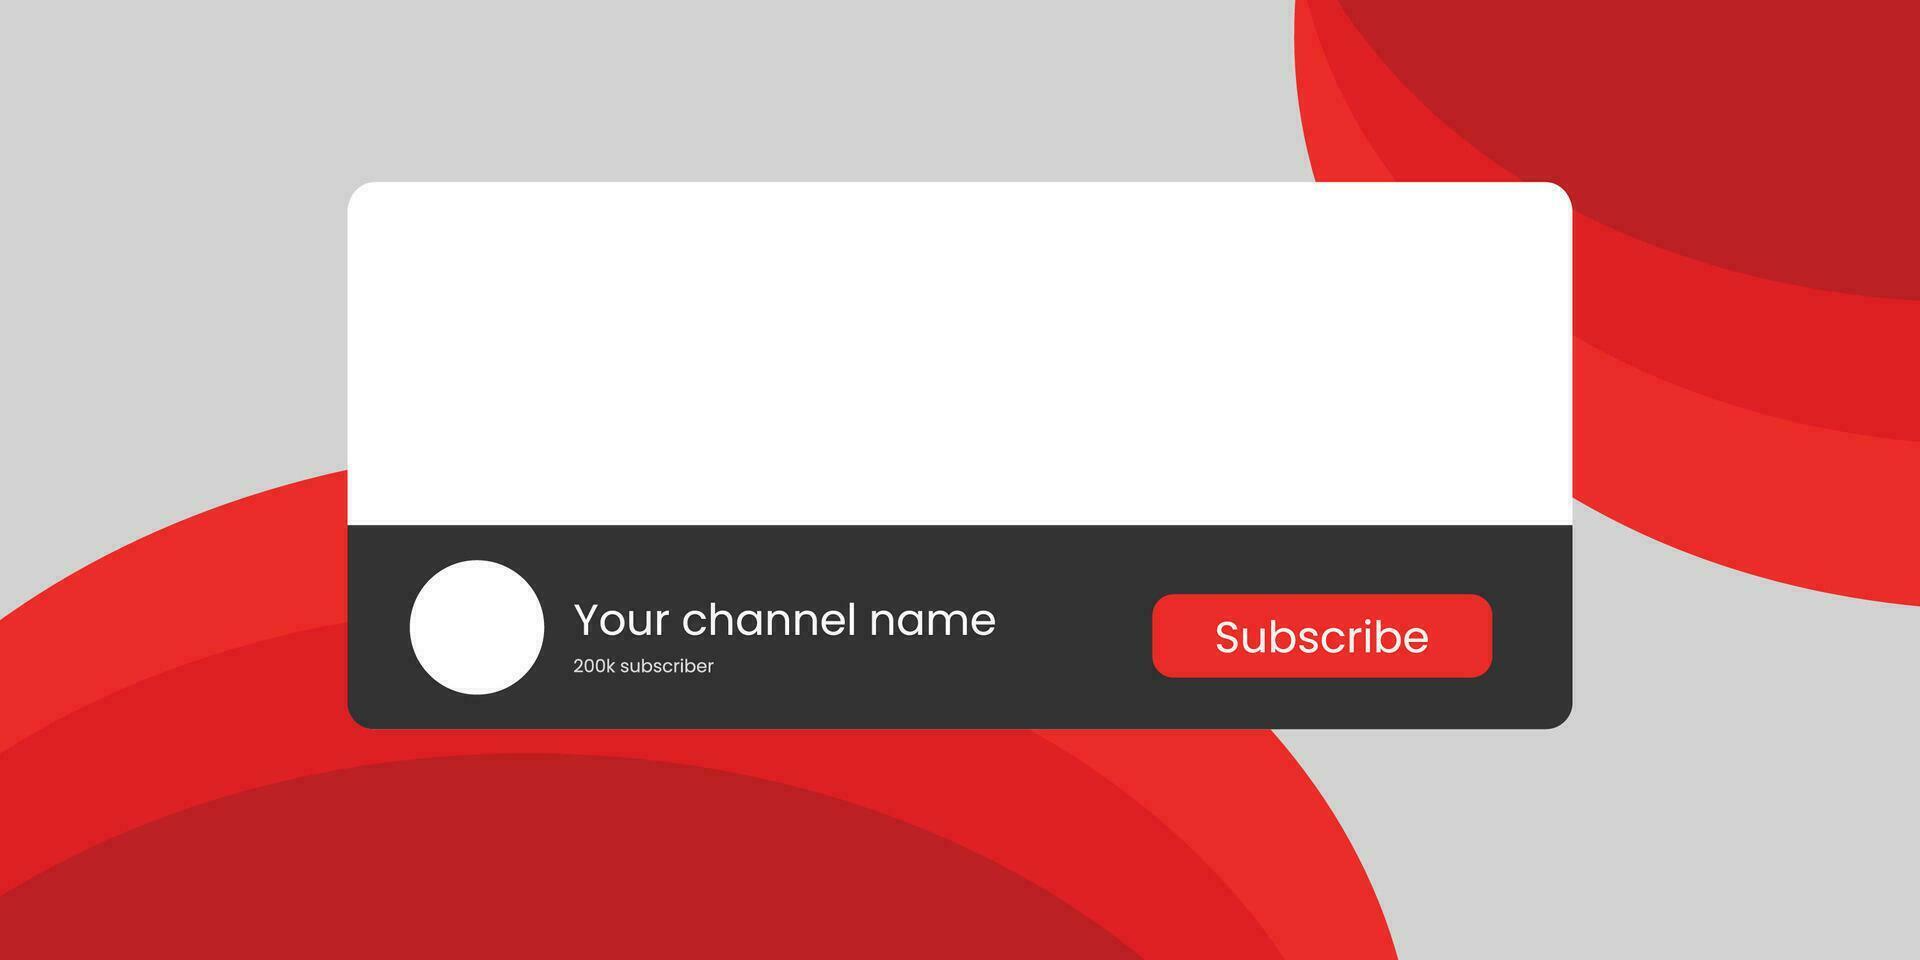 Youtube Channel Name Lower Third with Content Placeholder. Placeholder for Channel Logo. Vector illustration